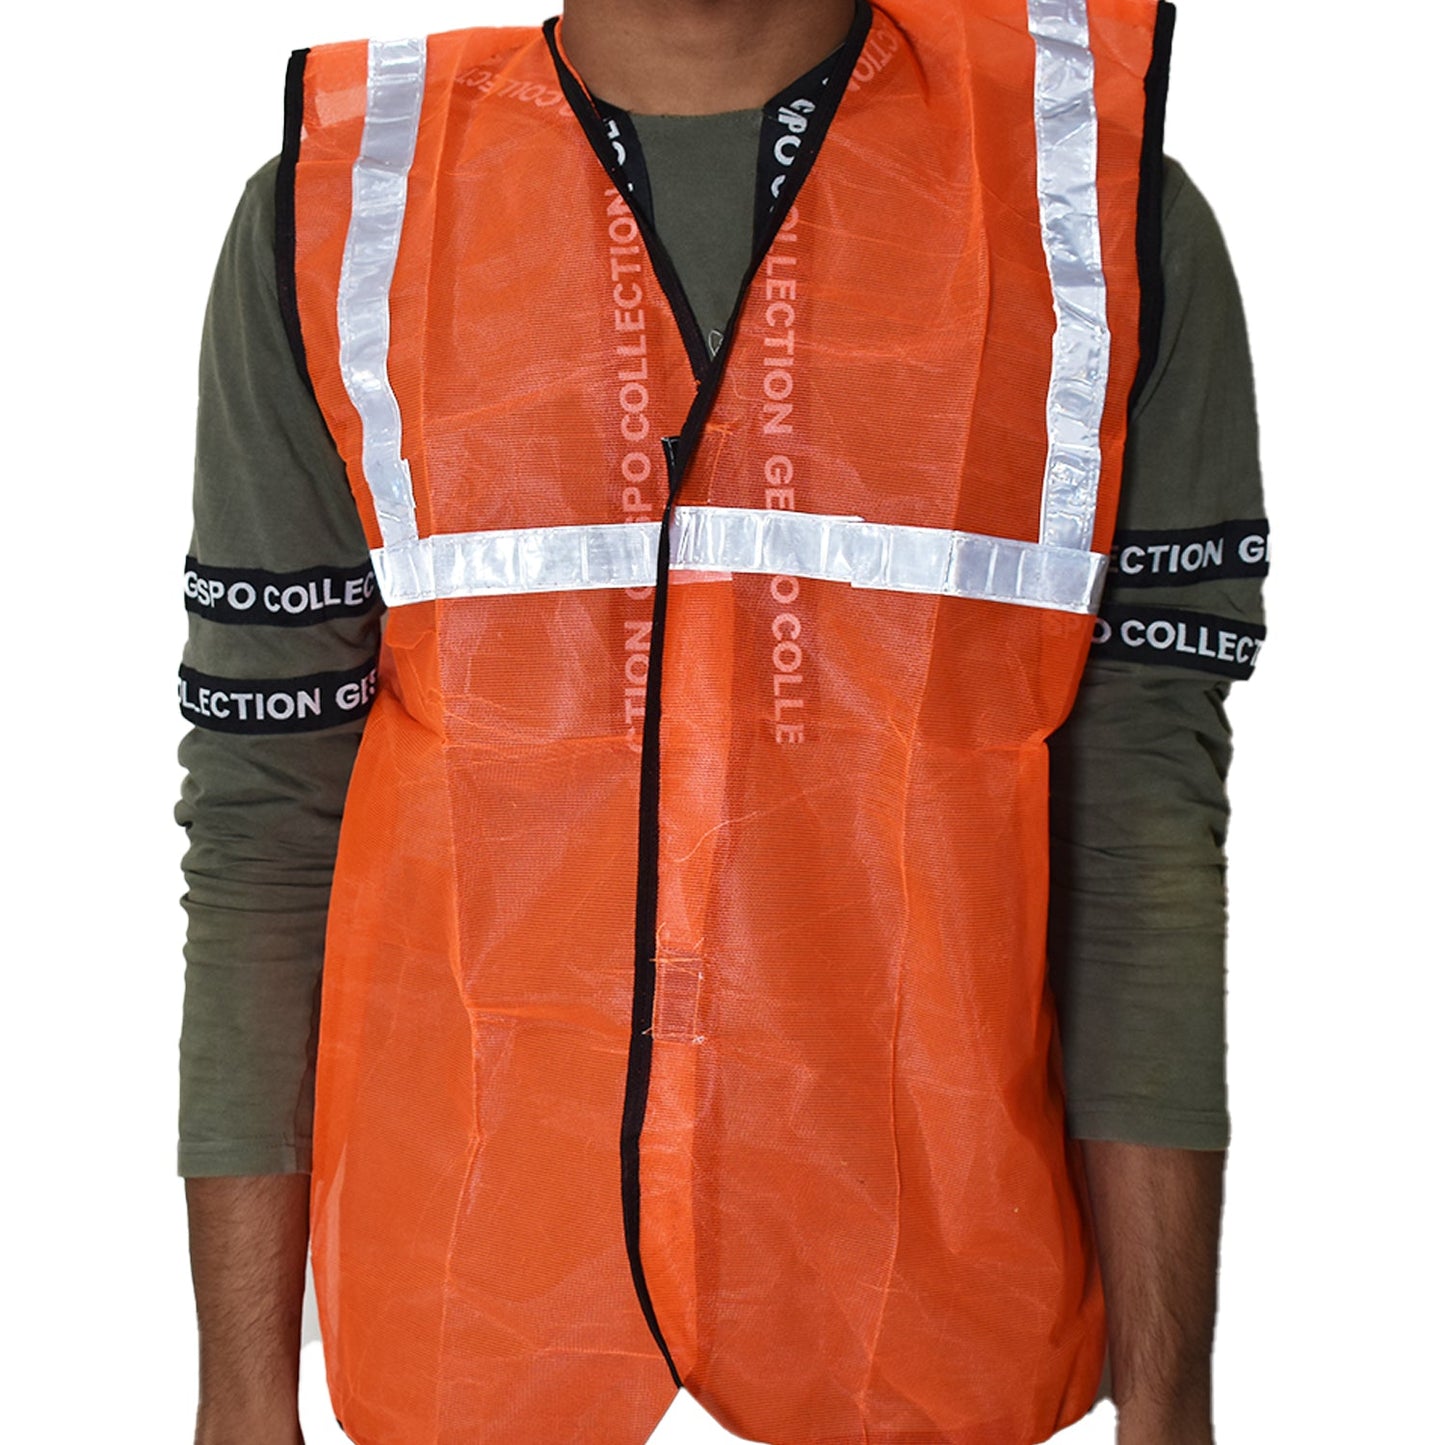 Orange Safety Jacket For Having protection against accidents usually in construction area's.